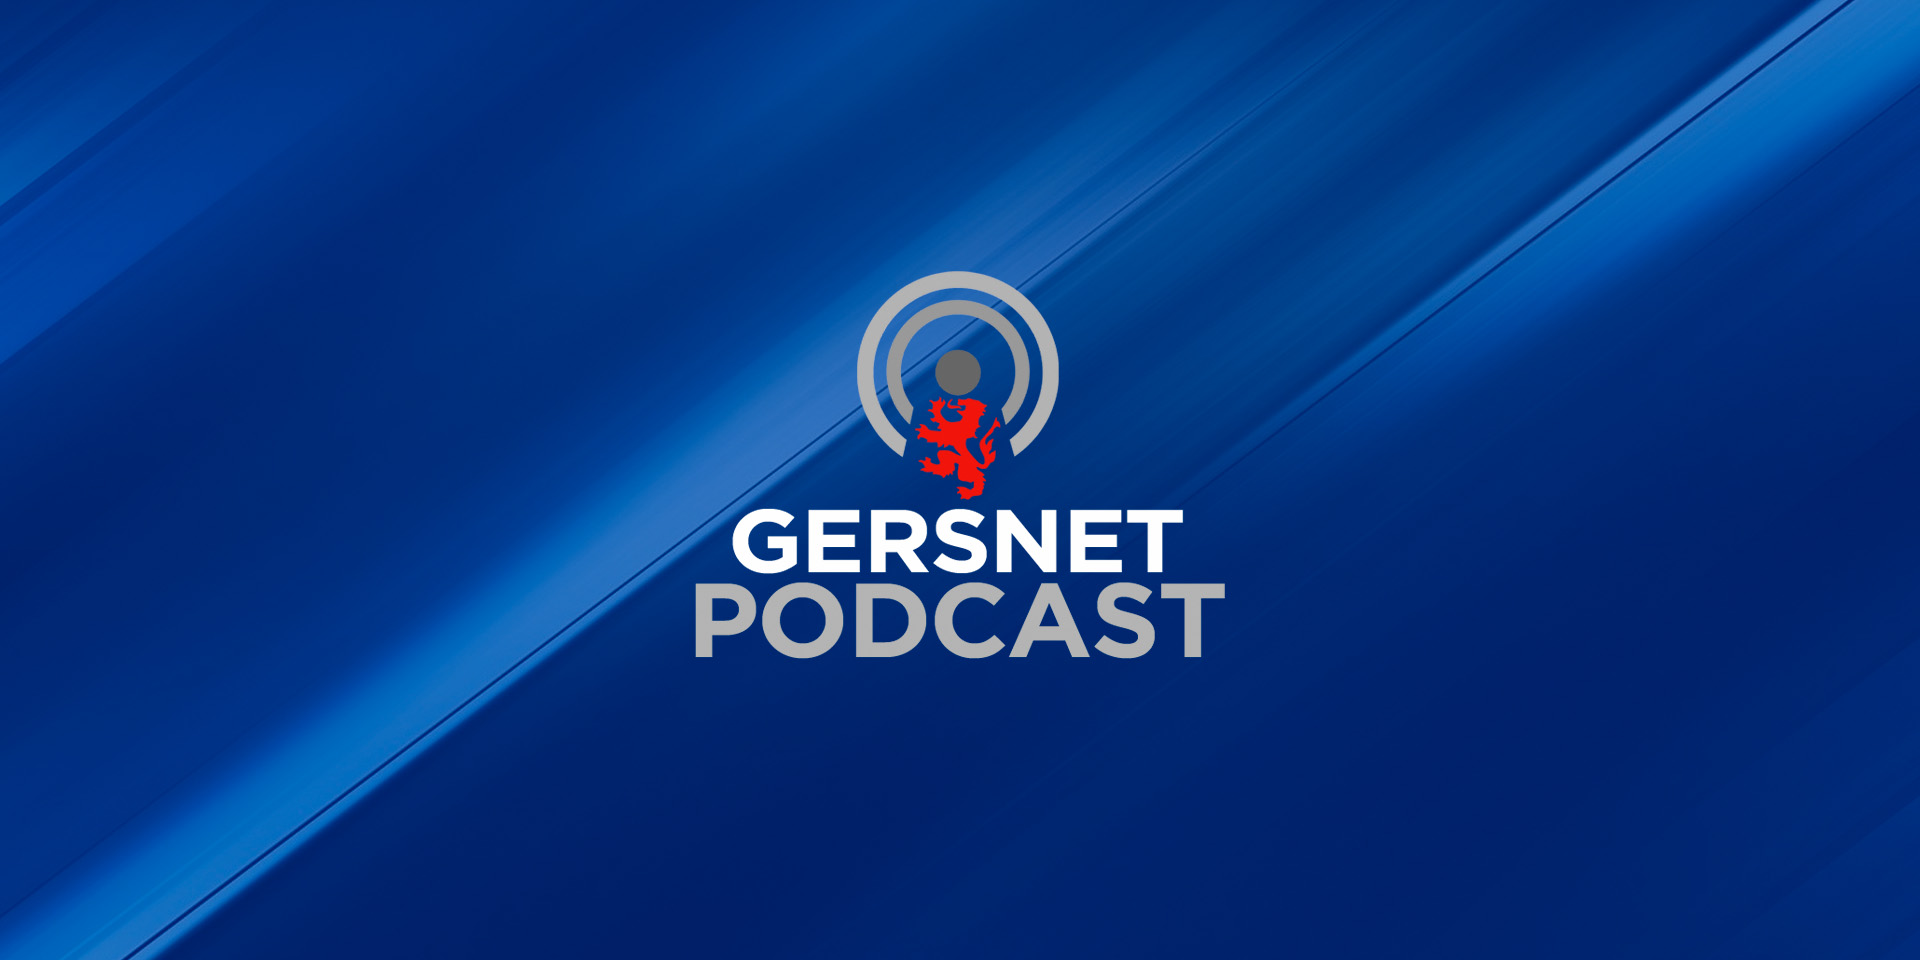 Gersnet Podcast 269 - Coasting in the Capital